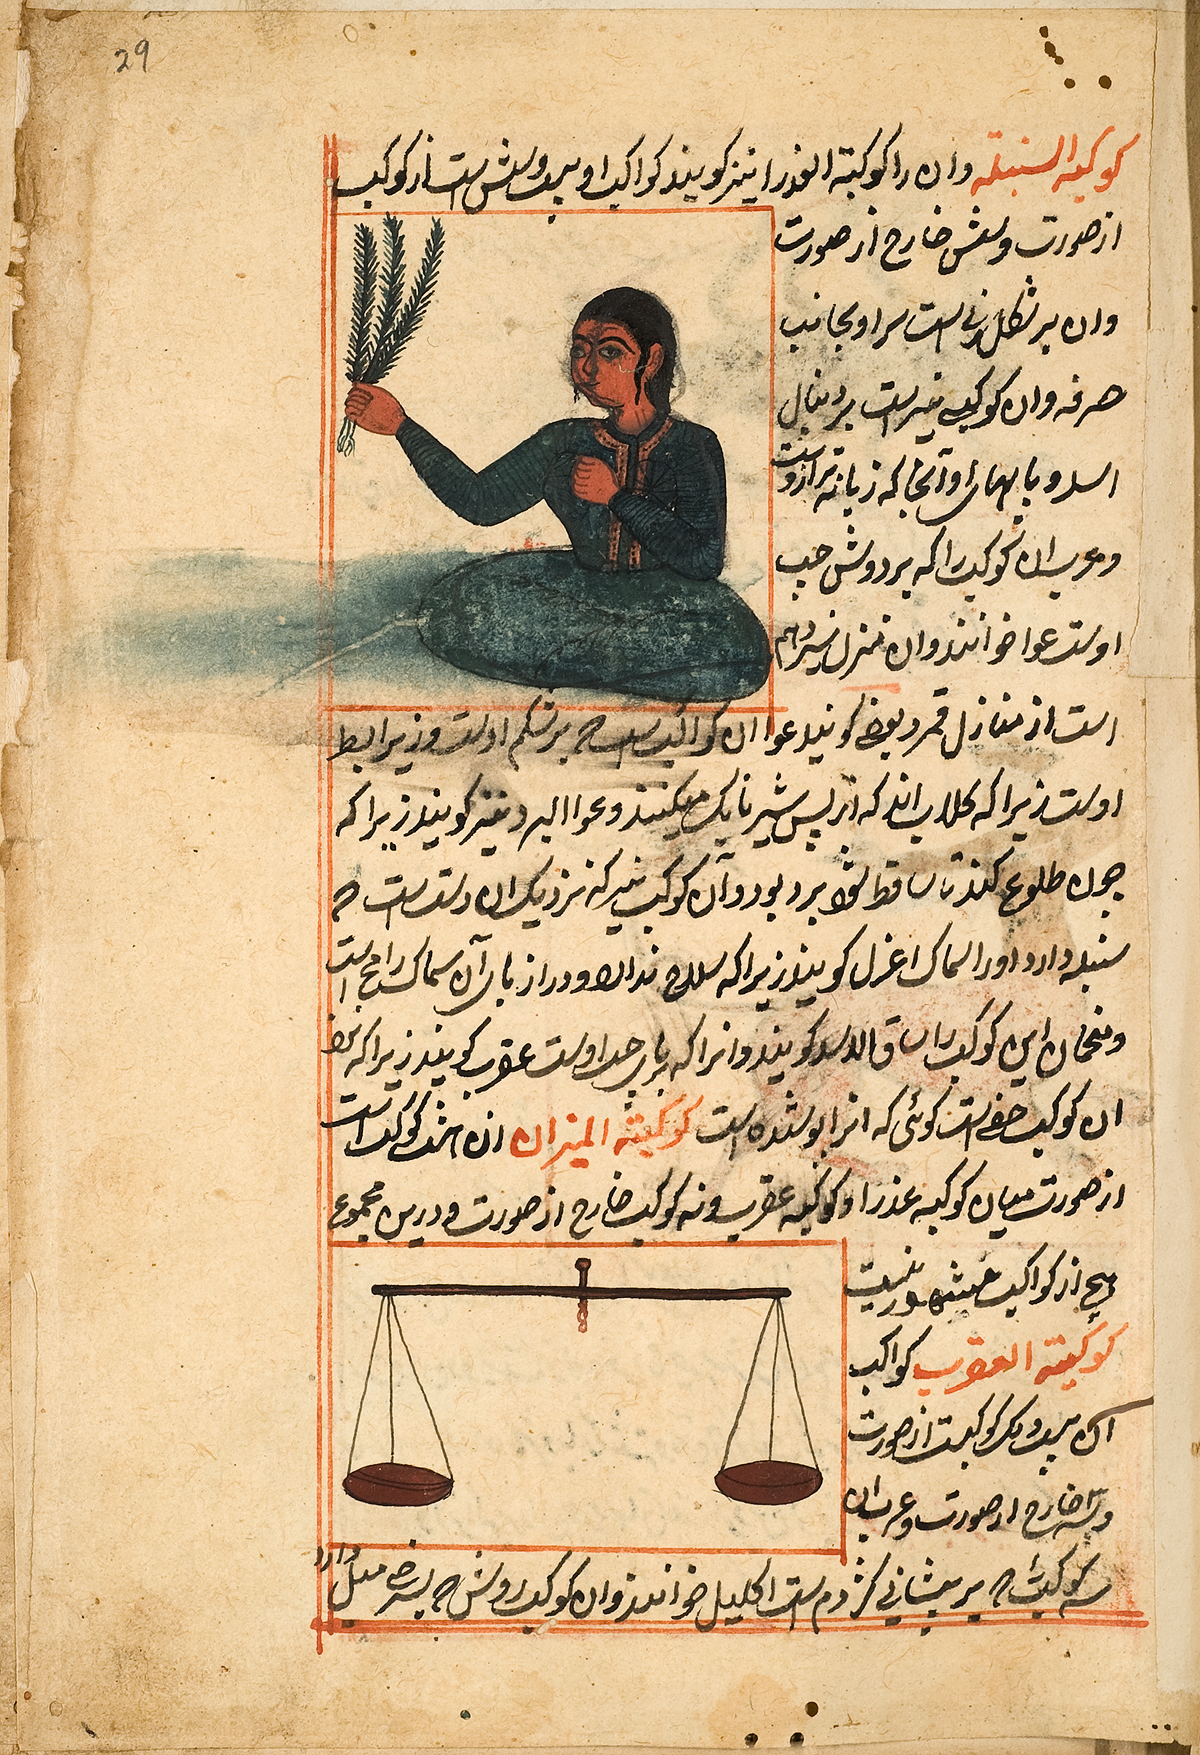 The zodiac constellation Virgo represented as a seated young woman in a green dress holding up three sprigs of a plant in her right hand, and the constellation Libra represented as a pair of scales; both images surrounded by Persian text and a red double ruled border.